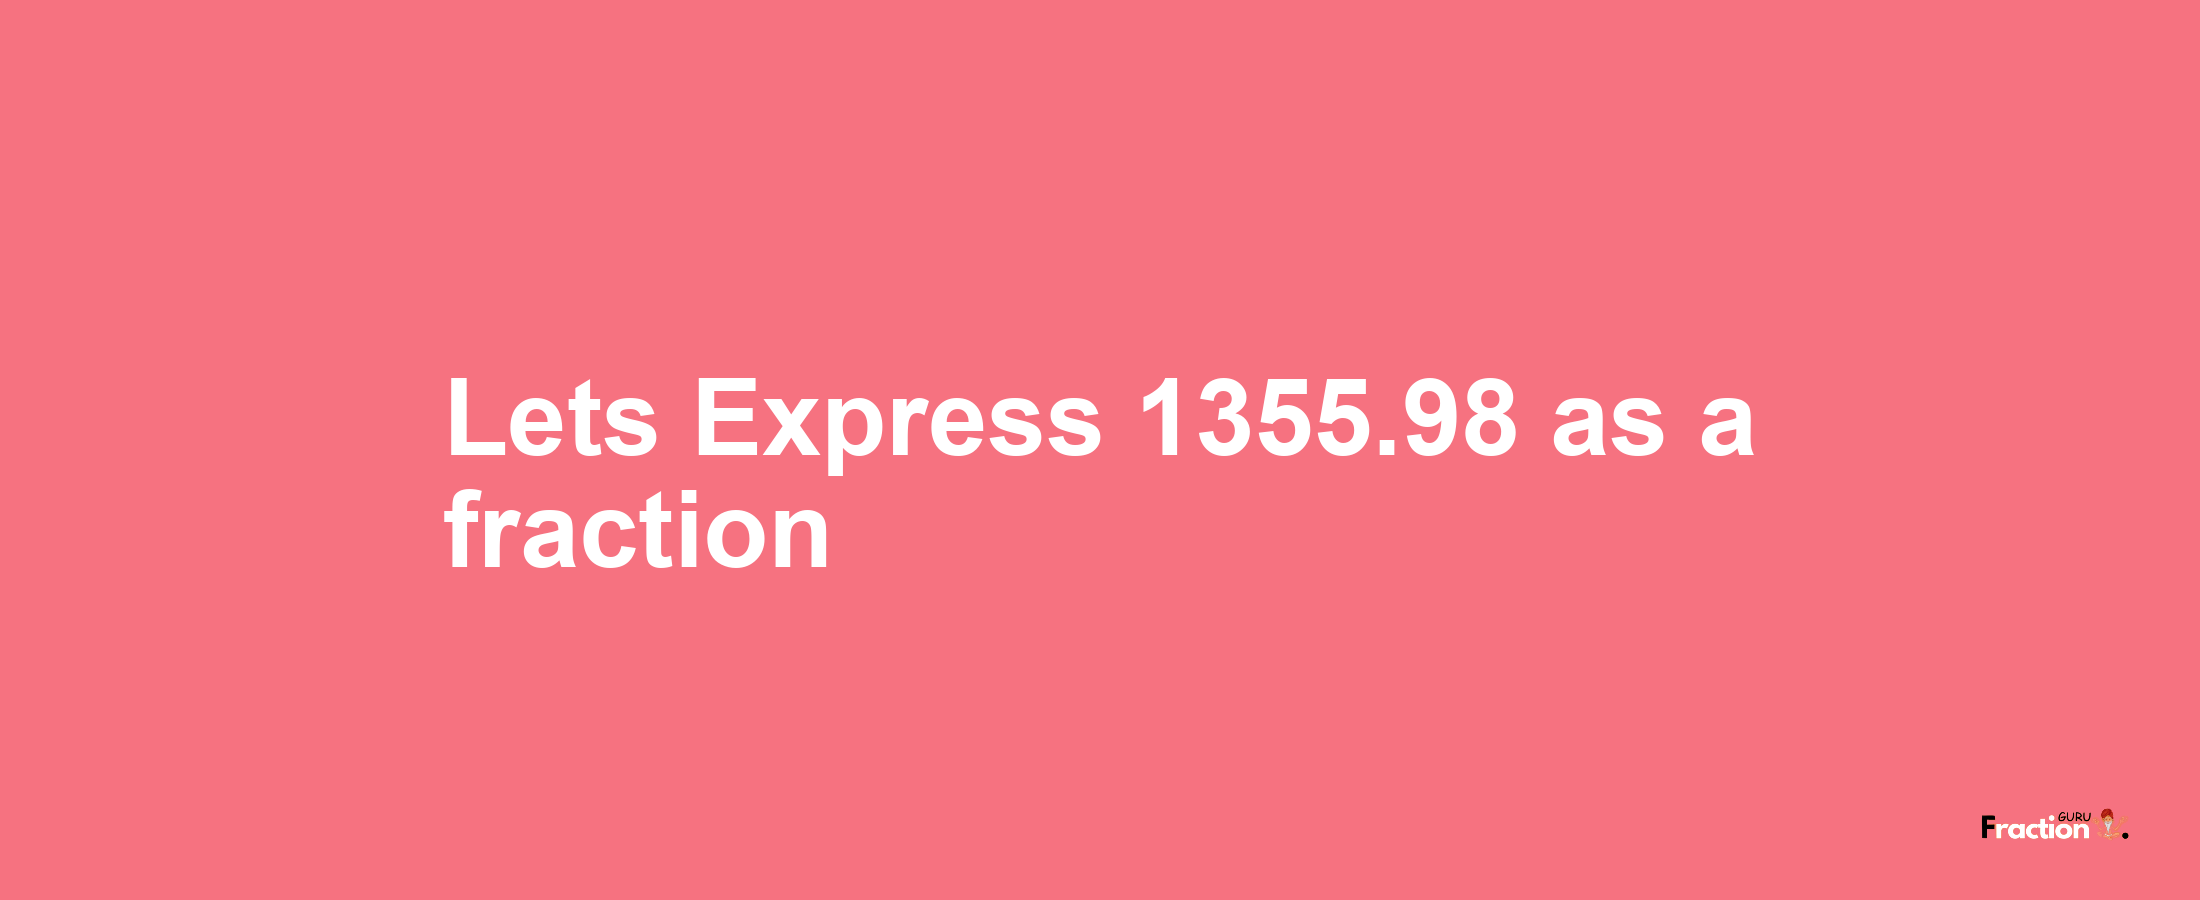 Lets Express 1355.98 as afraction